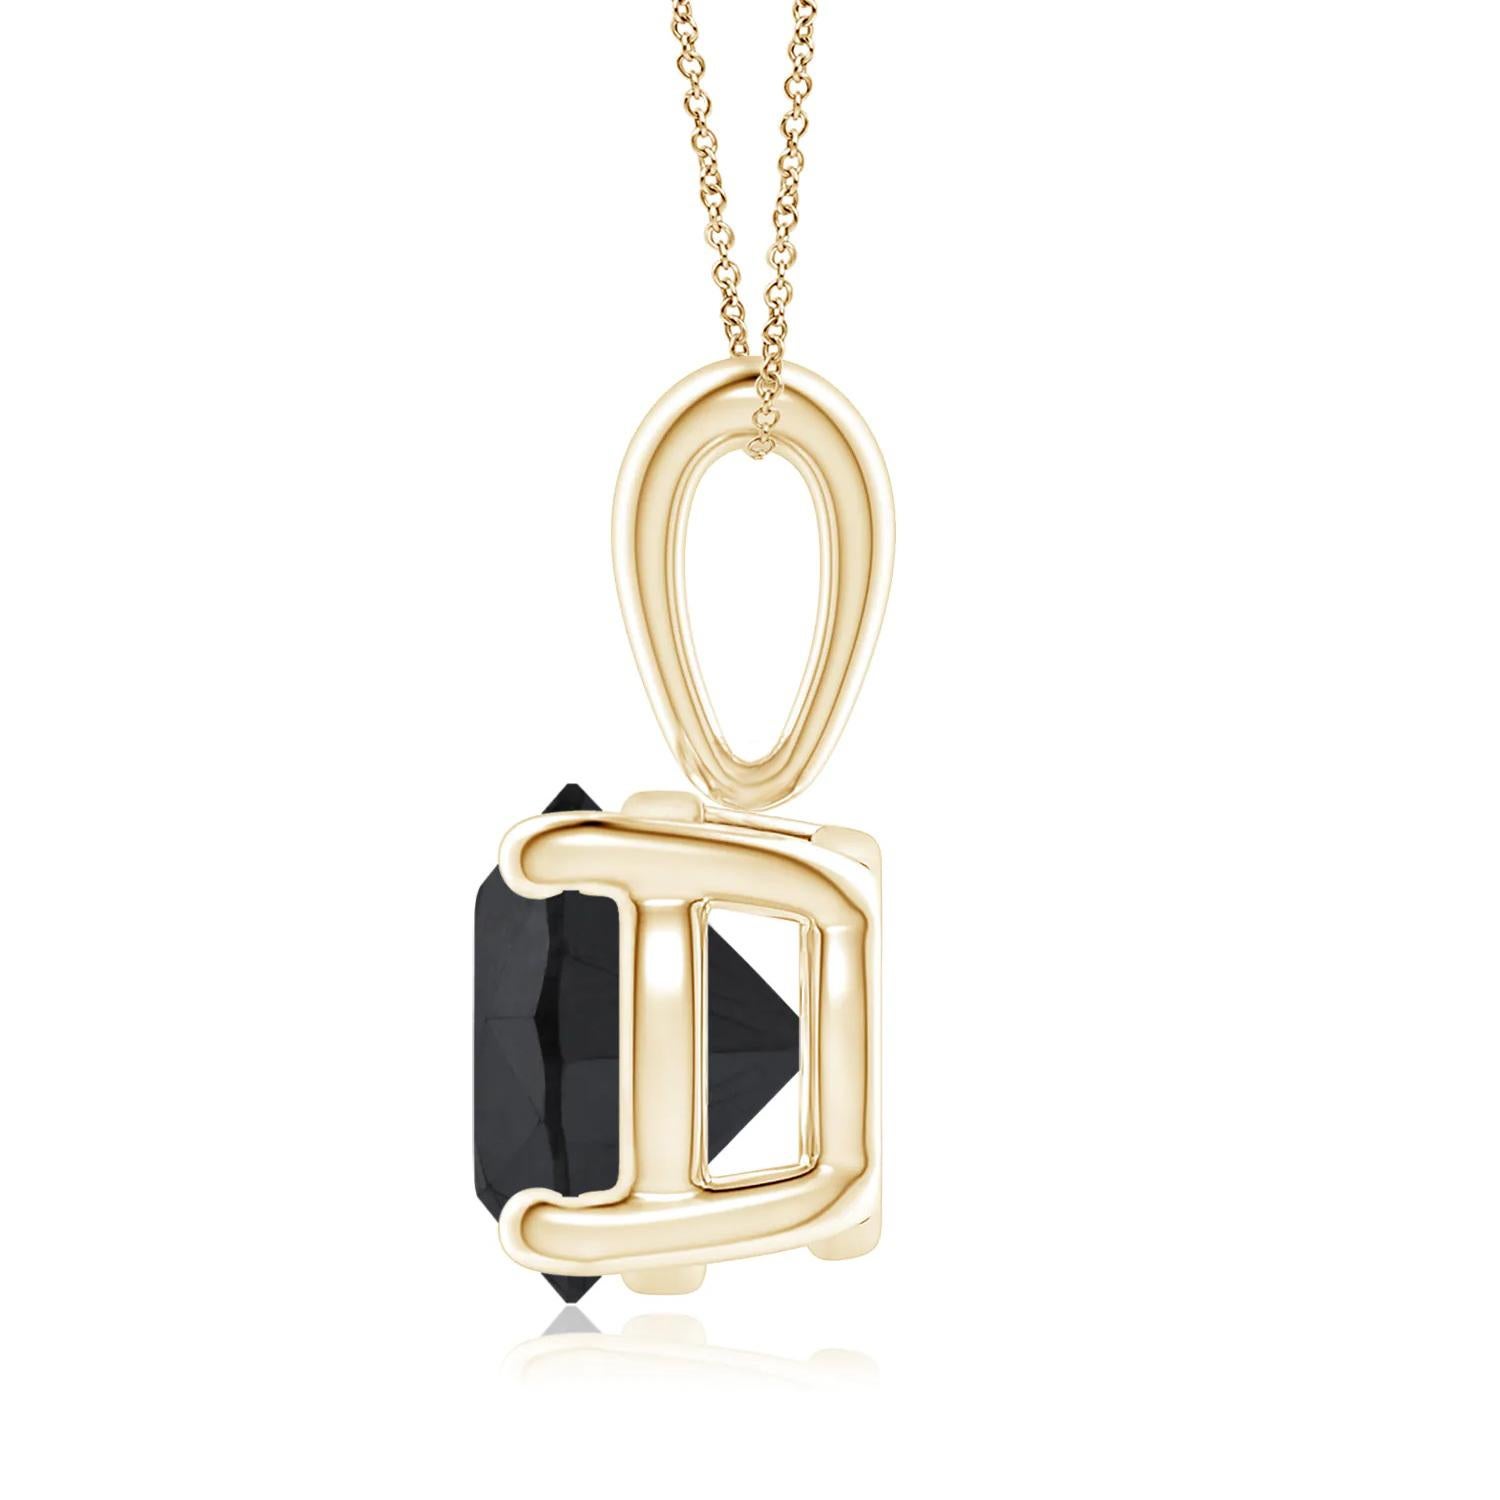 Round Cut 3.03 Carat Round Black Diamond Solitaire Pendant Necklace in 14K Yellow Gold